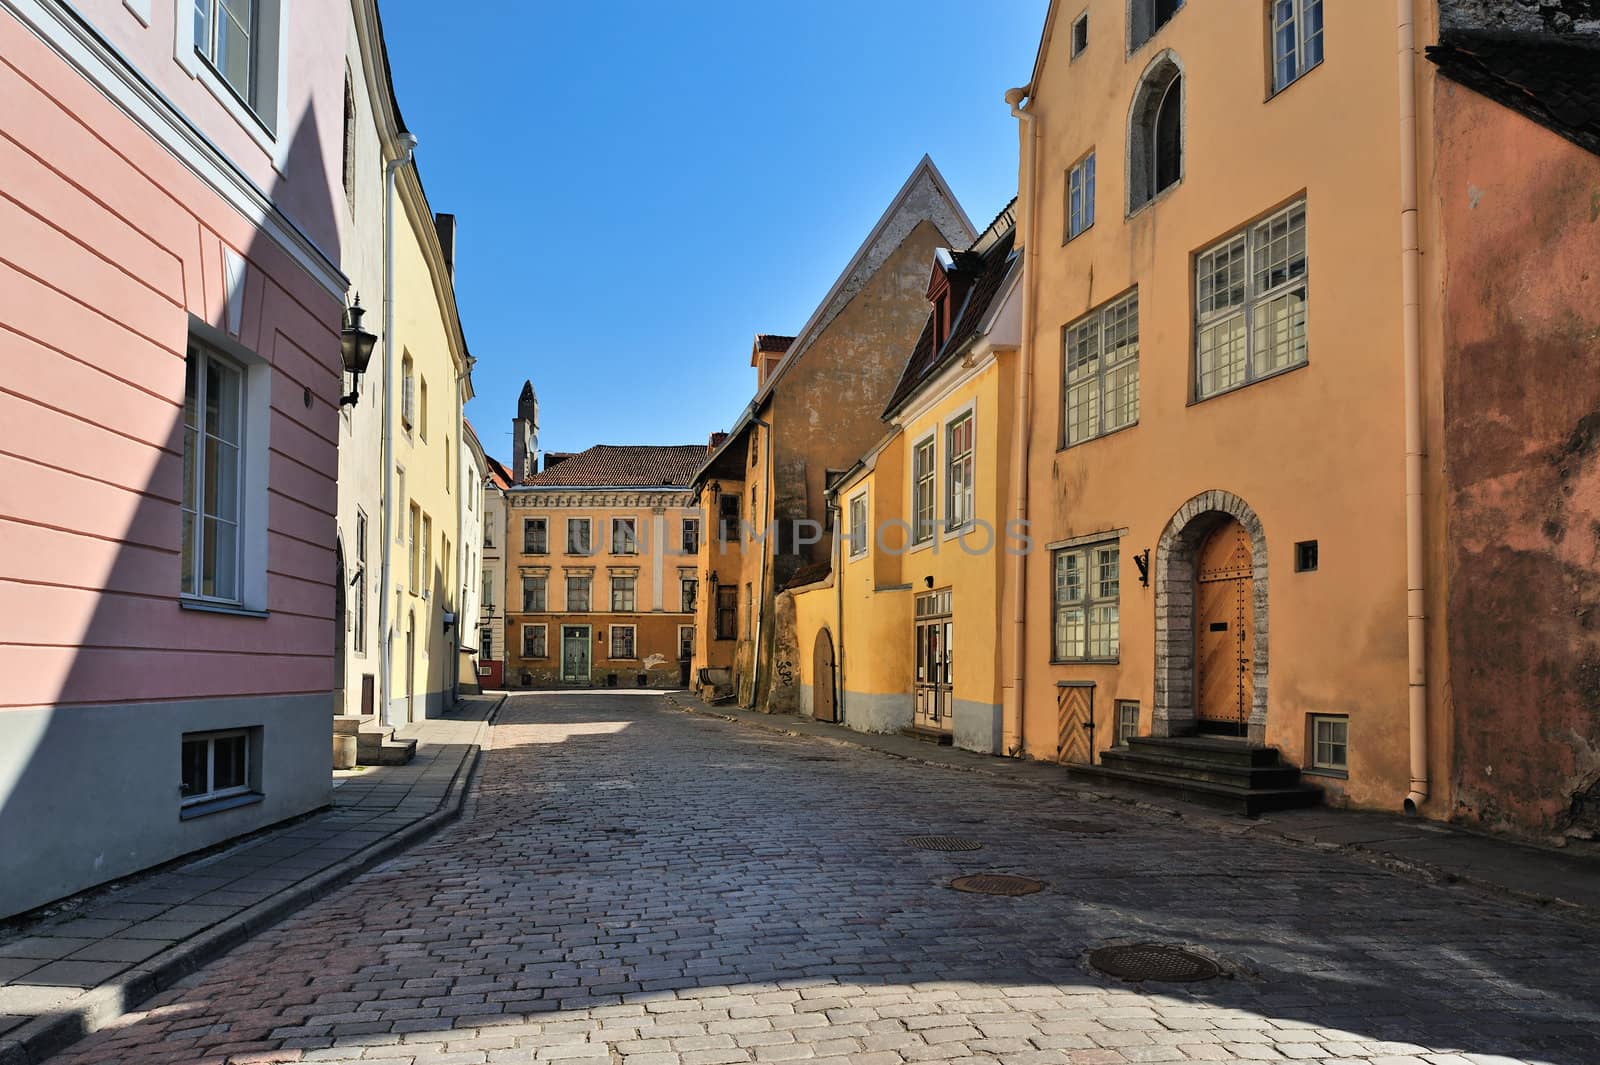 The narrow cobbled street in old town